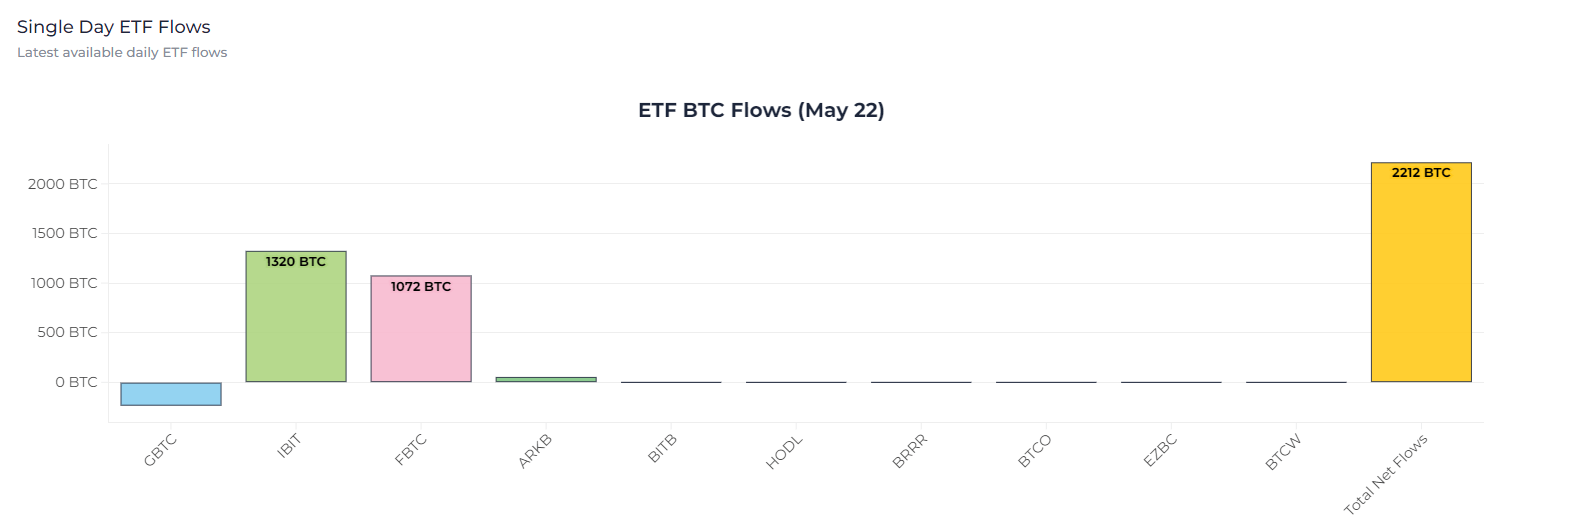 ETF BTC Flows May 22: (Source: Heyapollo)